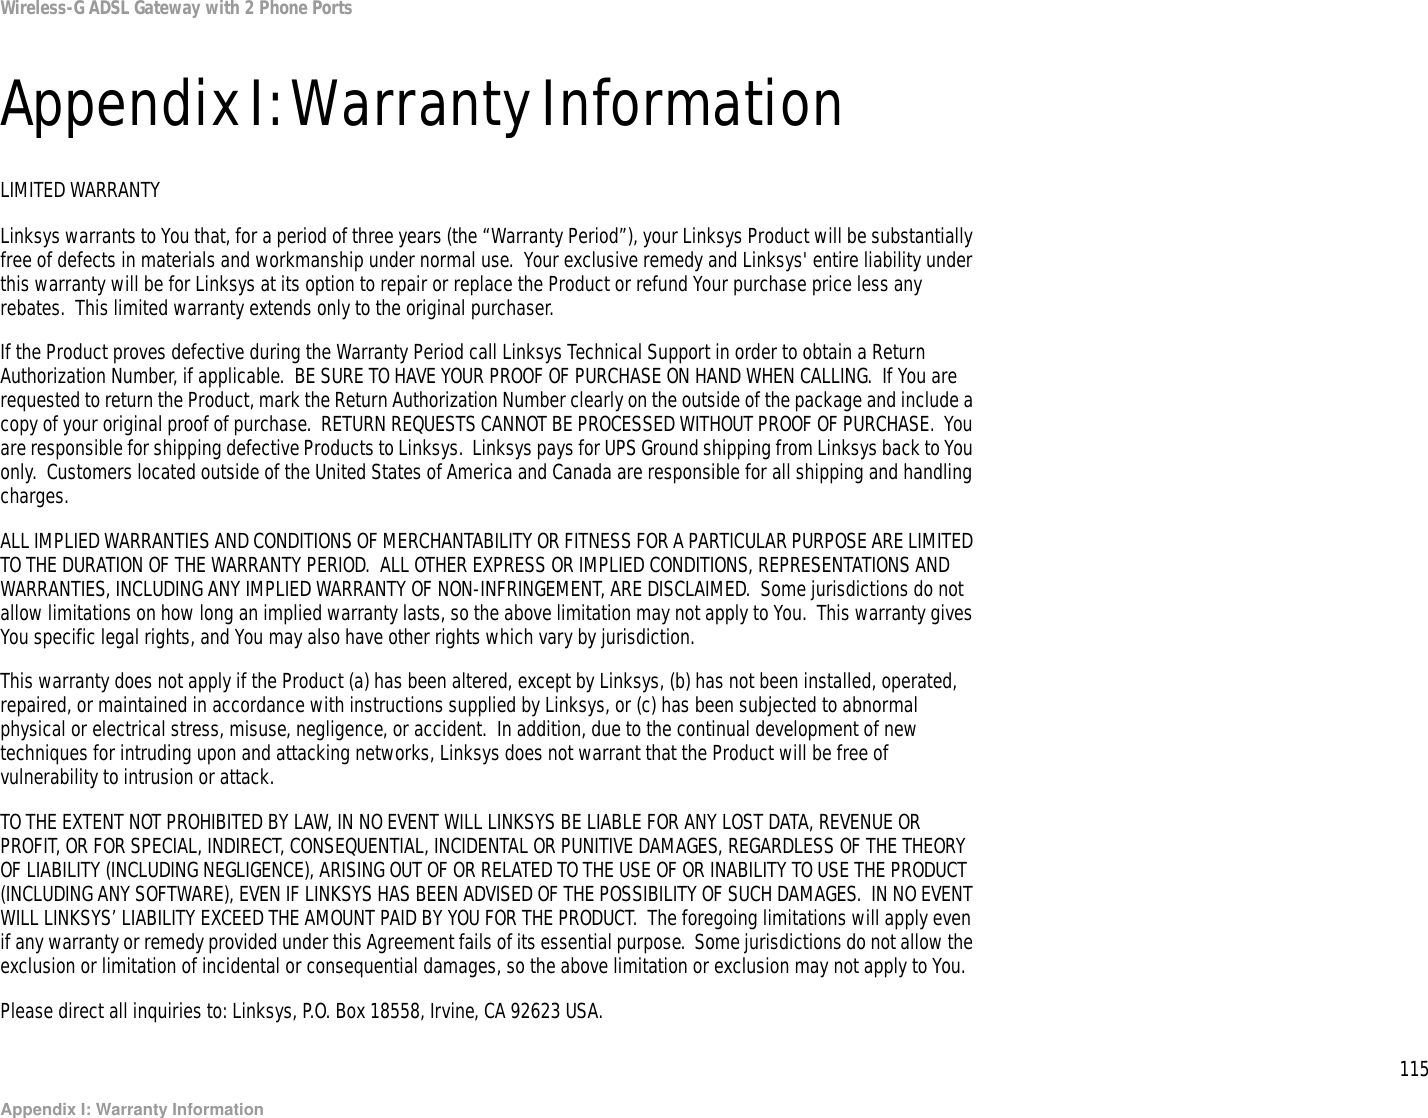 115Appendix I: Warranty InformationWireless-G ADSL Gateway with 2 Phone PortsAppendix I: Warranty InformationLIMITED WARRANTYLinksys warrants to You that, for a period of three years (the “Warranty Period”), your Linksys Product will be substantially free of defects in materials and workmanship under normal use.  Your exclusive remedy and Linksys&apos; entire liability under this warranty will be for Linksys at its option to repair or replace the Product or refund Your purchase price less any rebates.  This limited warranty extends only to the original purchaser.  If the Product proves defective during the Warranty Period call Linksys Technical Support in order to obtain a Return Authorization Number, if applicable.  BE SURE TO HAVE YOUR PROOF OF PURCHASE ON HAND WHEN CALLING.  If You are requested to return the Product, mark the Return Authorization Number clearly on the outside of the package and include a copy of your original proof of purchase.  RETURN REQUESTS CANNOT BE PROCESSED WITHOUT PROOF OF PURCHASE.  You are responsible for shipping defective Products to Linksys.  Linksys pays for UPS Ground shipping from Linksys back to You only.  Customers located outside of the United States of America and Canada are responsible for all shipping and handling charges. ALL IMPLIED WARRANTIES AND CONDITIONS OF MERCHANTABILITY OR FITNESS FOR A PARTICULAR PURPOSE ARE LIMITED TO THE DURATION OF THE WARRANTY PERIOD.  ALL OTHER EXPRESS OR IMPLIED CONDITIONS, REPRESENTATIONS AND WARRANTIES, INCLUDING ANY IMPLIED WARRANTY OF NON-INFRINGEMENT, ARE DISCLAIMED.  Some jurisdictions do not allow limitations on how long an implied warranty lasts, so the above limitation may not apply to You.  This warranty gives You specific legal rights, and You may also have other rights which vary by jurisdiction.This warranty does not apply if the Product (a) has been altered, except by Linksys, (b) has not been installed, operated, repaired, or maintained in accordance with instructions supplied by Linksys, or (c) has been subjected to abnormal physical or electrical stress, misuse, negligence, or accident.  In addition, due to the continual development of new techniques for intruding upon and attacking networks, Linksys does not warrant that the Product will be free of vulnerability to intrusion or attack.TO THE EXTENT NOT PROHIBITED BY LAW, IN NO EVENT WILL LINKSYS BE LIABLE FOR ANY LOST DATA, REVENUE OR PROFIT, OR FOR SPECIAL, INDIRECT, CONSEQUENTIAL, INCIDENTAL OR PUNITIVE DAMAGES, REGARDLESS OF THE THEORY OF LIABILITY (INCLUDING NEGLIGENCE), ARISING OUT OF OR RELATED TO THE USE OF OR INABILITY TO USE THE PRODUCT (INCLUDING ANY SOFTWARE), EVEN IF LINKSYS HAS BEEN ADVISED OF THE POSSIBILITY OF SUCH DAMAGES.  IN NO EVENT WILL LINKSYS’ LIABILITY EXCEED THE AMOUNT PAID BY YOU FOR THE PRODUCT.  The foregoing limitations will apply even if any warranty or remedy provided under this Agreement fails of its essential purpose.  Some jurisdictions do not allow the exclusion or limitation of incidental or consequential damages, so the above limitation or exclusion may not apply to You.Please direct all inquiries to: Linksys, P.O. Box 18558, Irvine, CA 92623 USA.